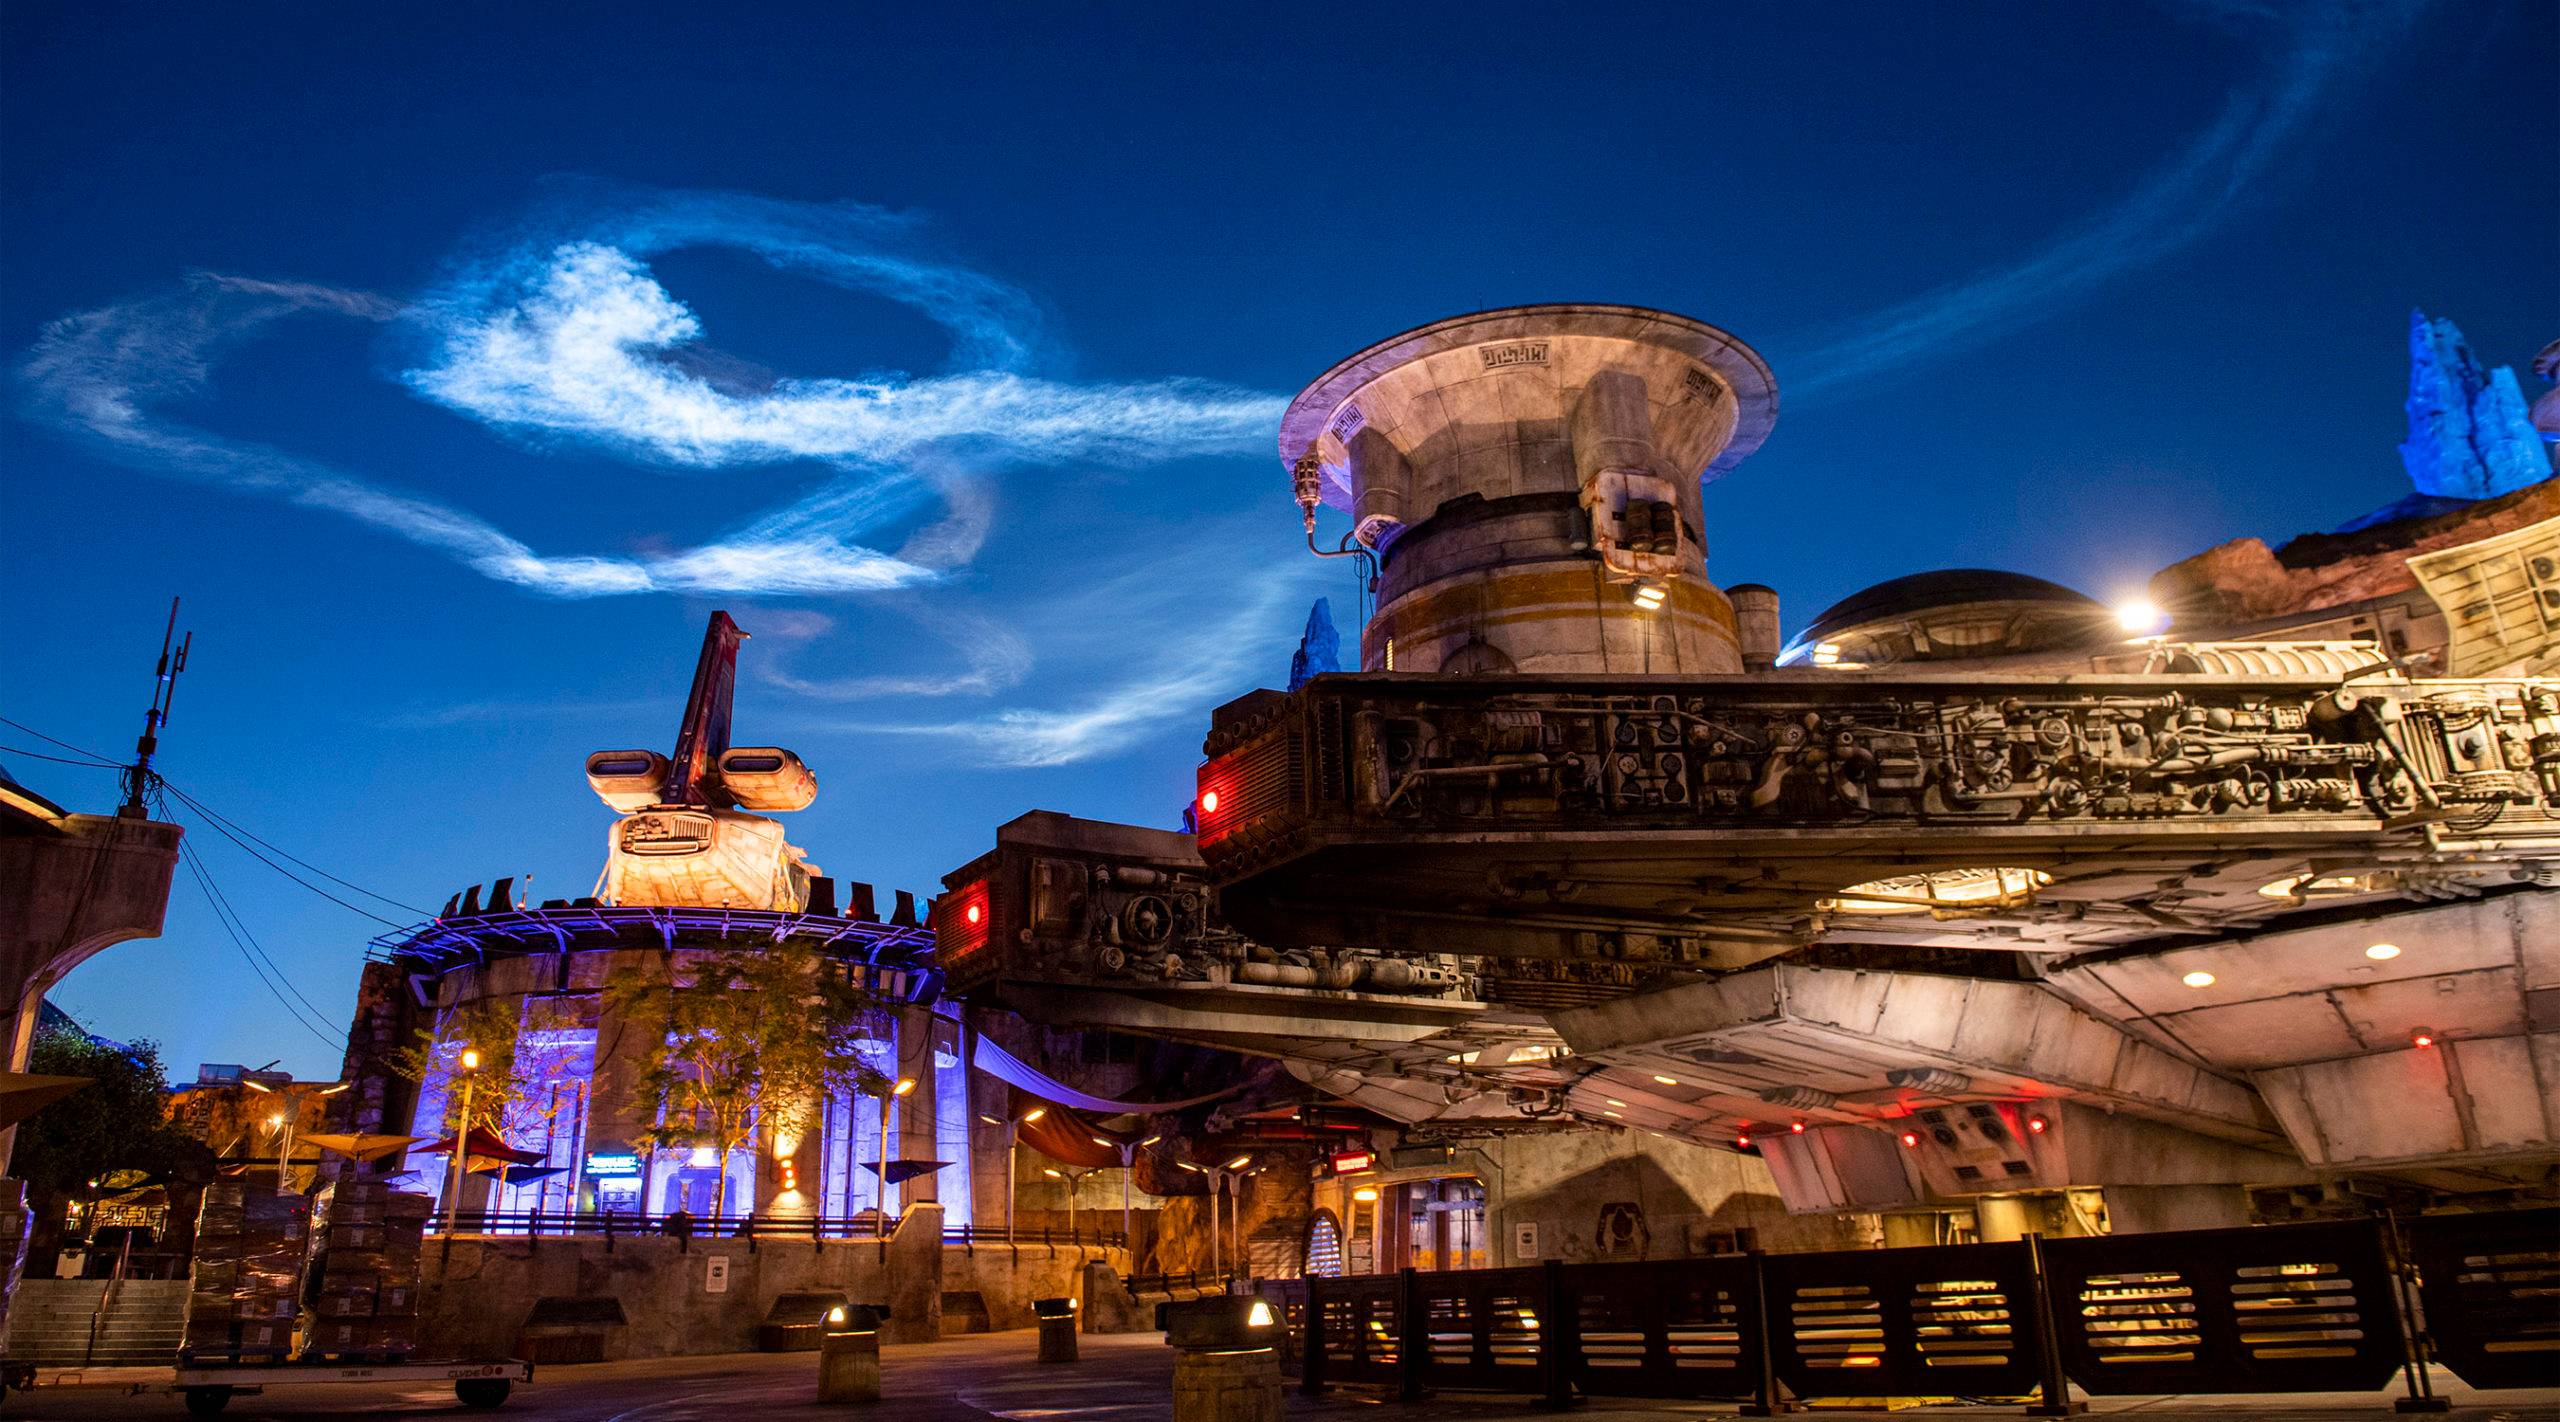 Disney photographers capture SpaceX Falcon 9 rocket launch over Star Wars Galaxy's Edge and Space Mountain at Disney World